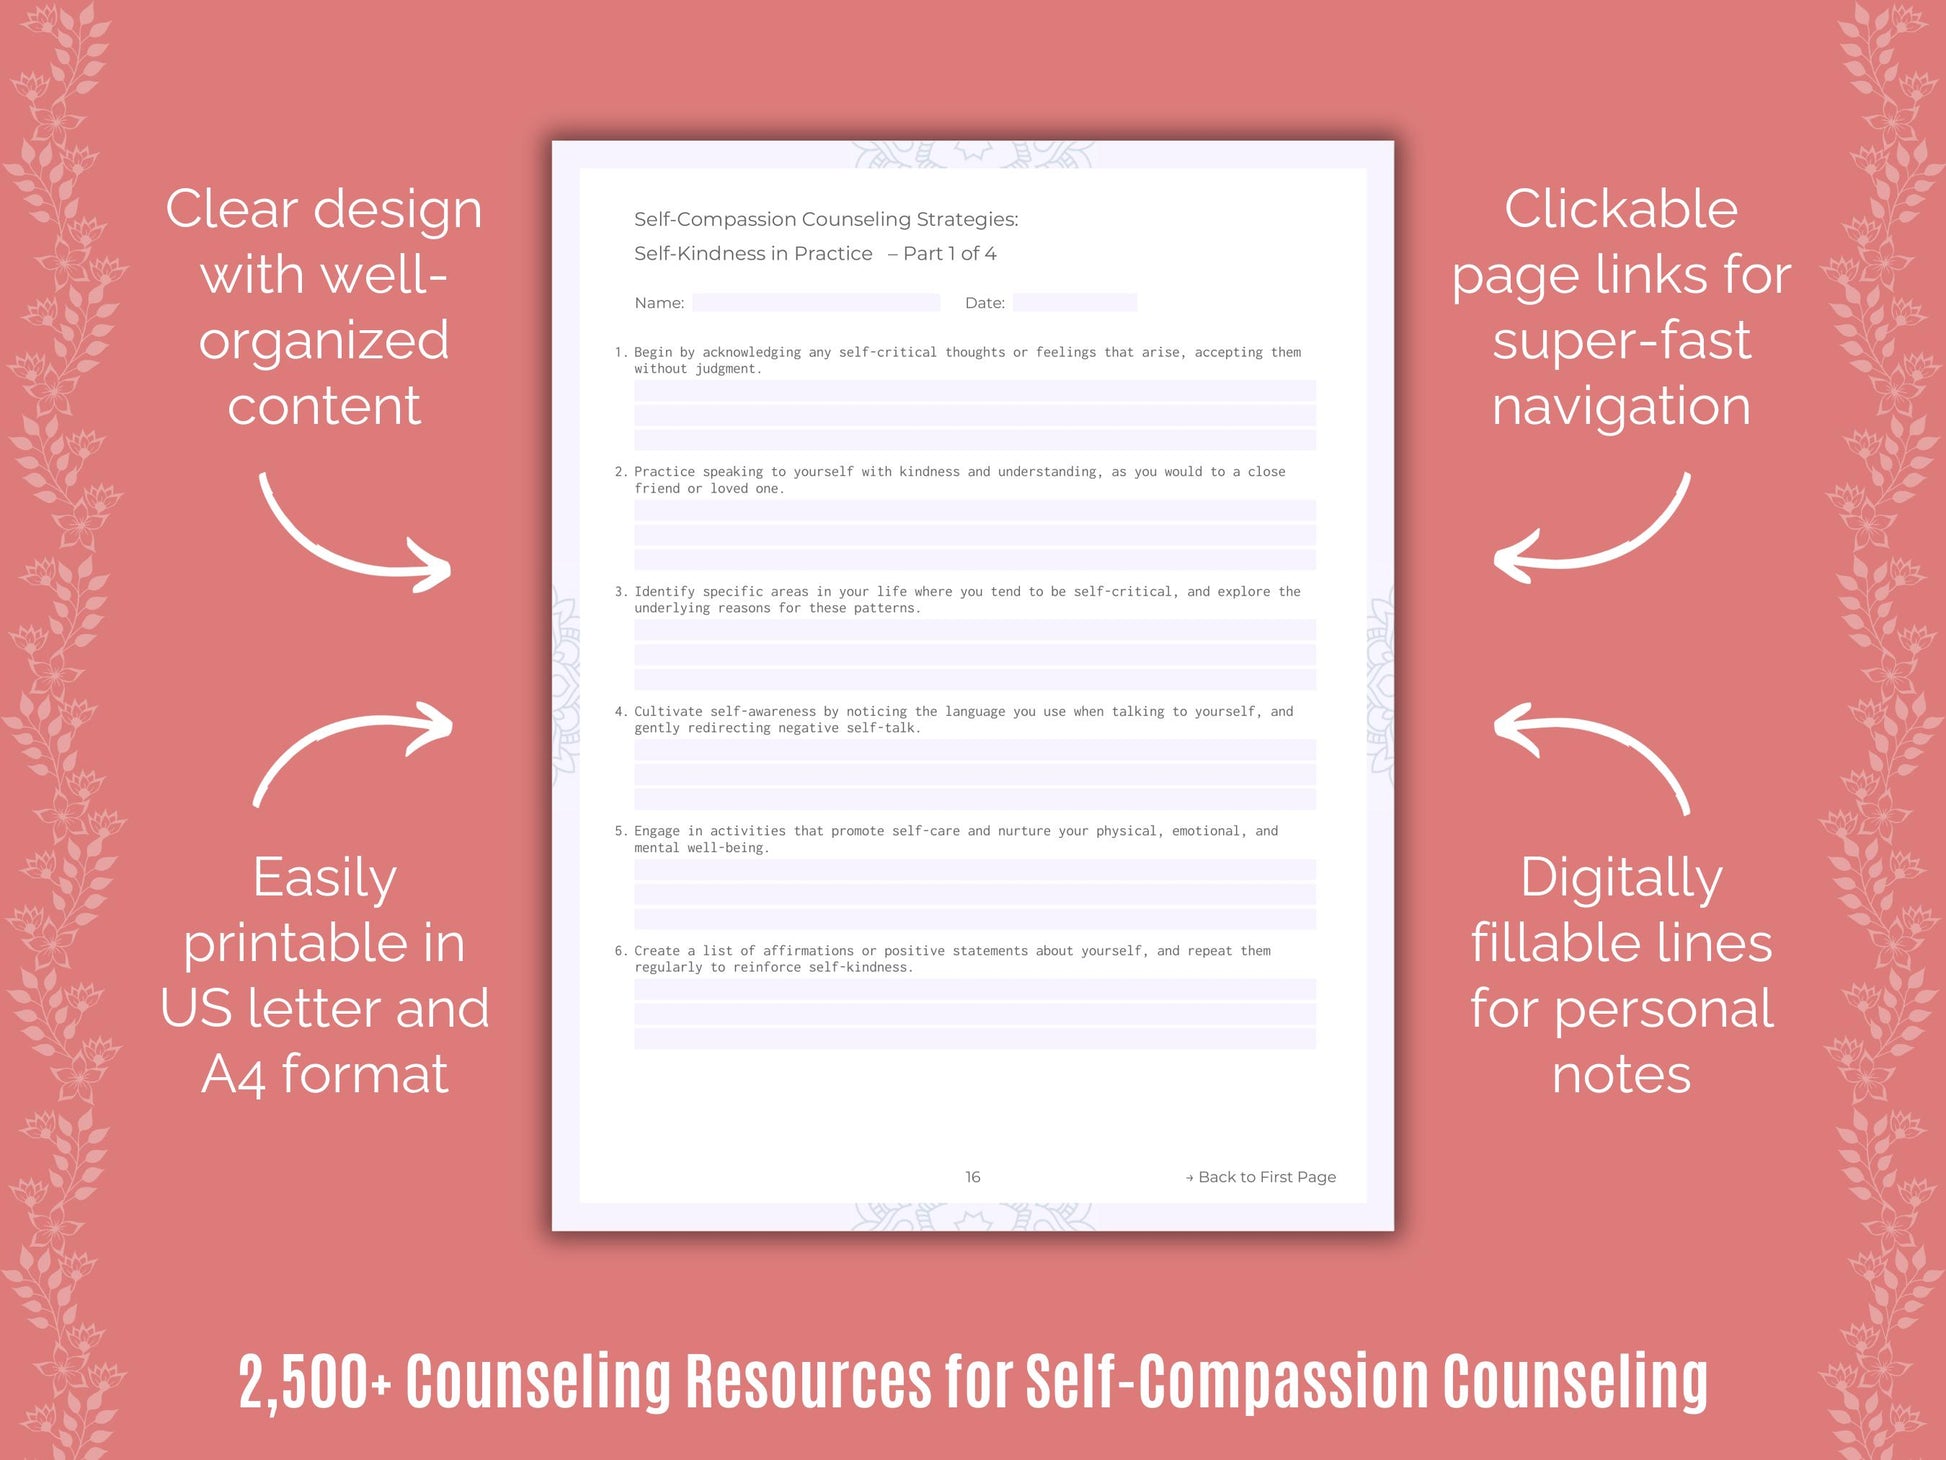 Worksheet, Workbook, Therapist, Template, Resource, Therapy, Content, Self-Compassion Tool, Self-Compassion Idea, Counseling, Self-Compassion, Mental Health, Counselor